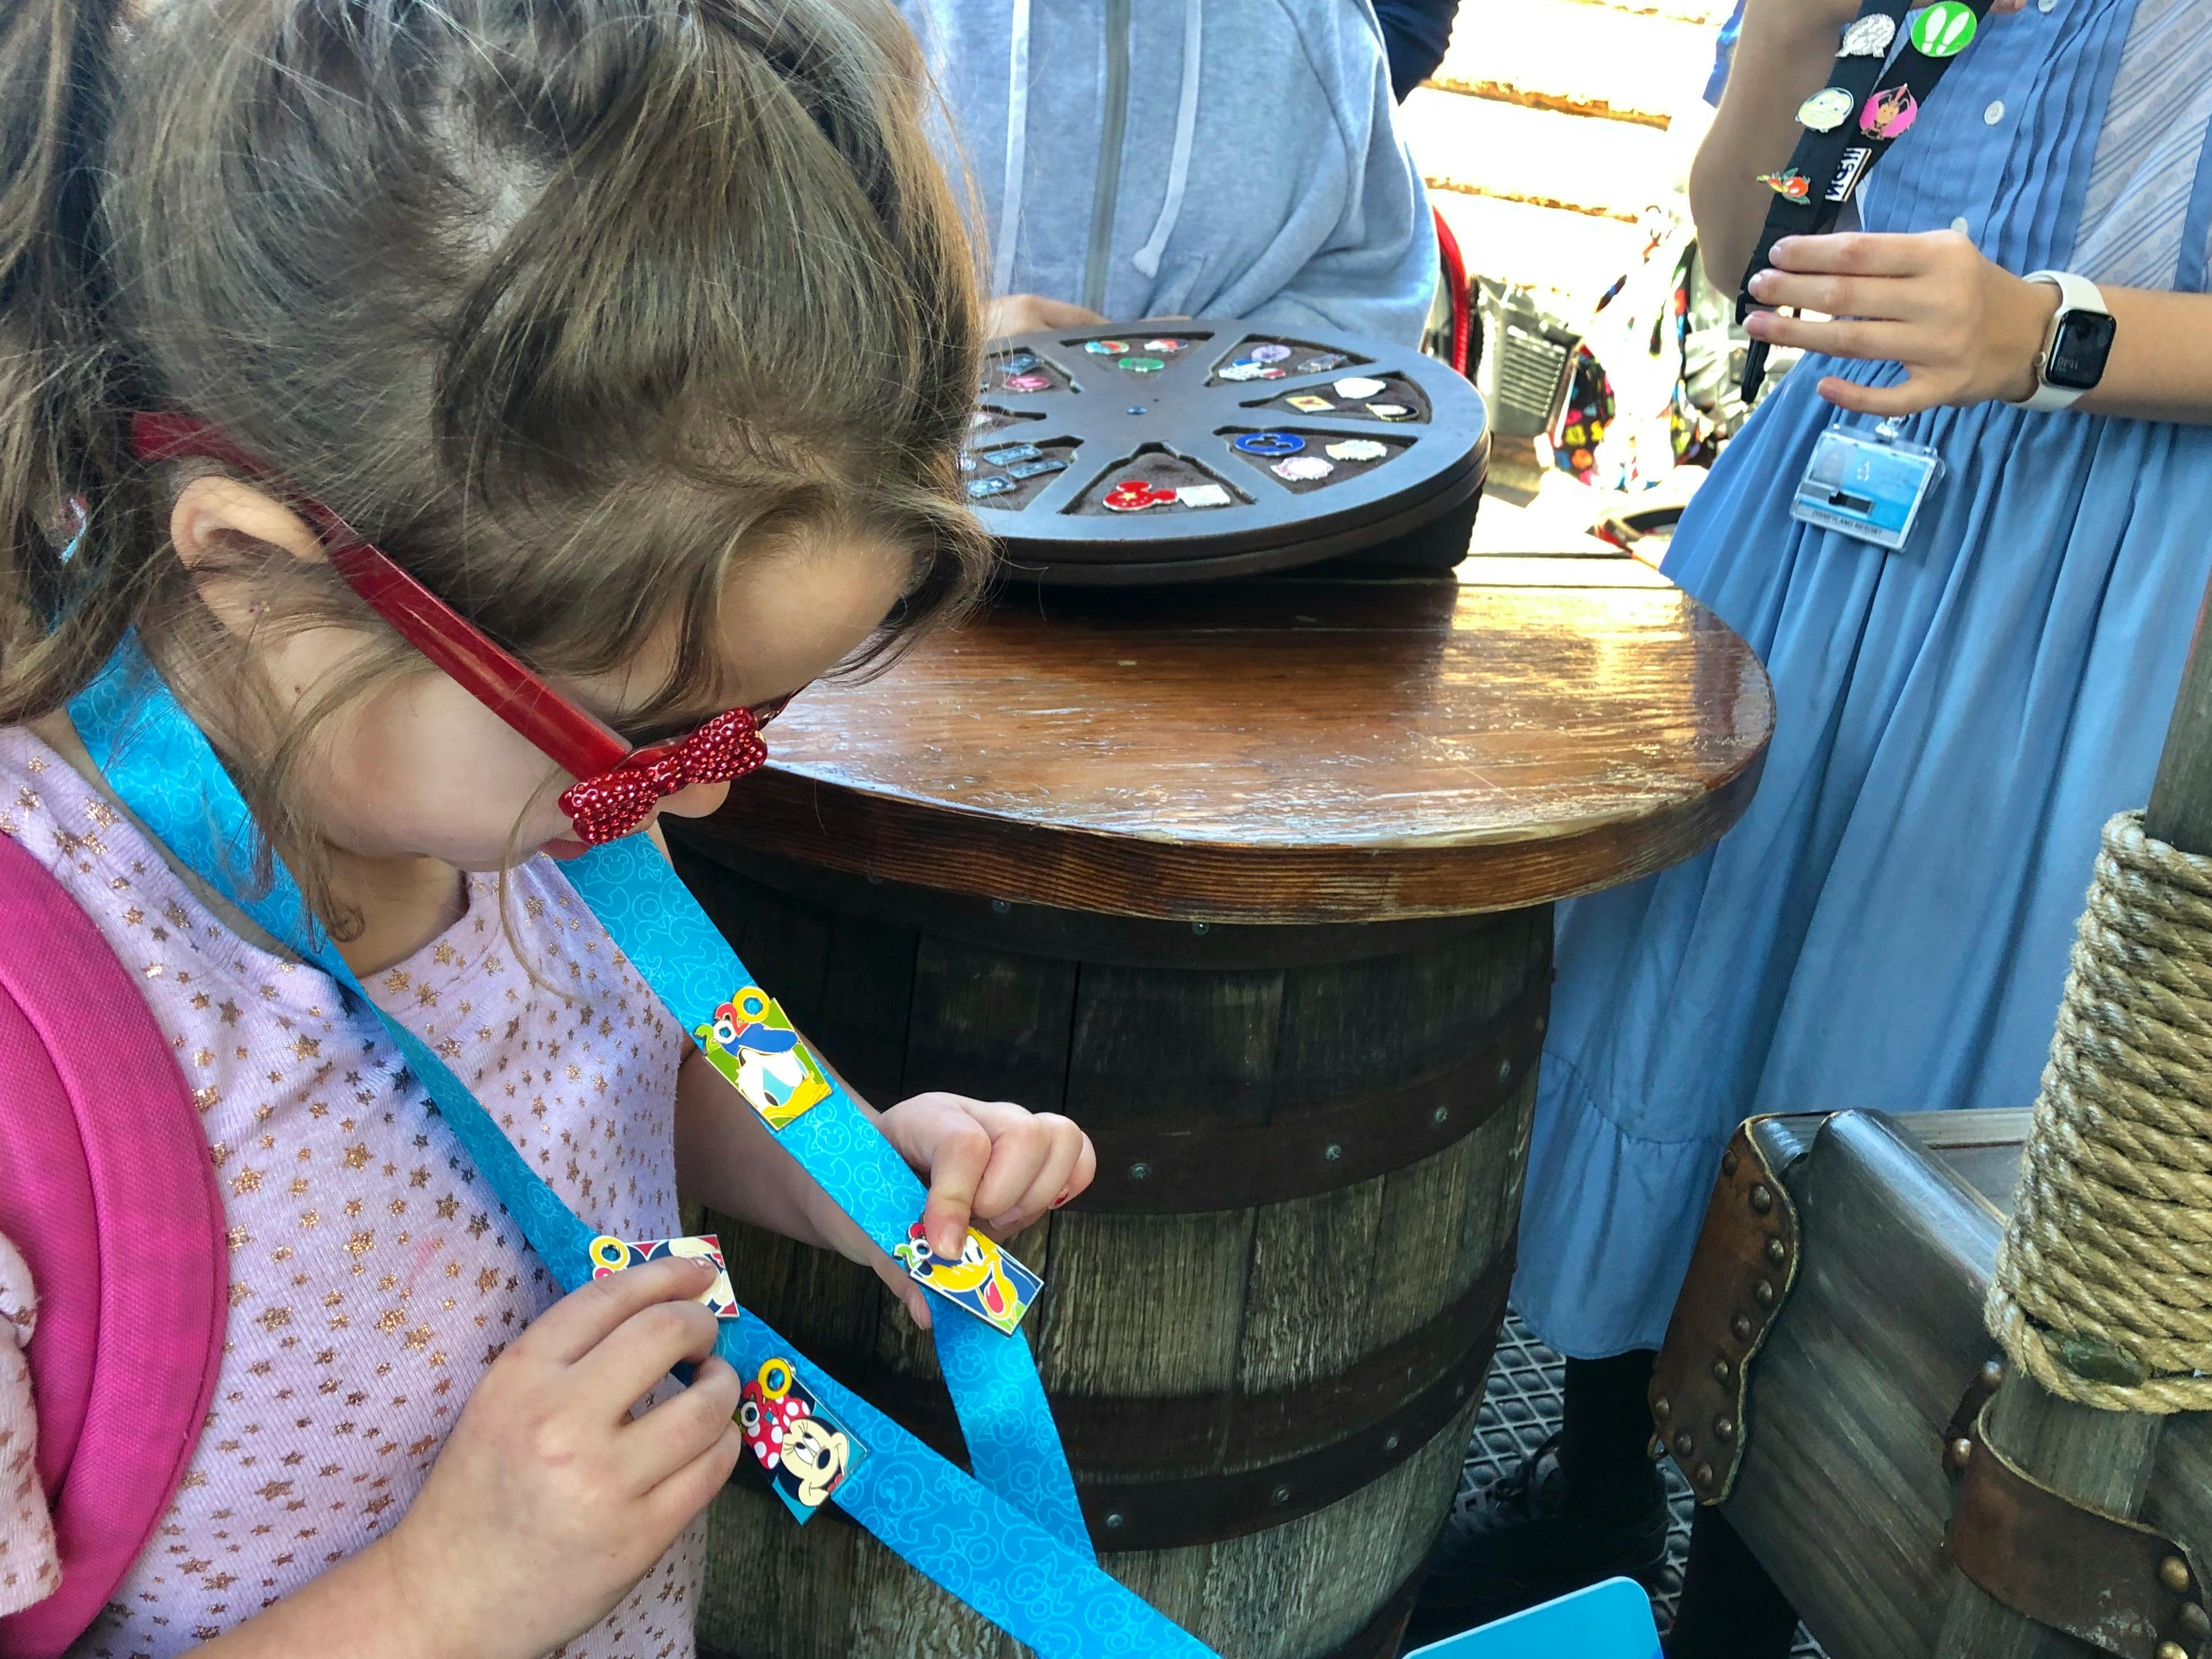 A child looking down at some Disney pins on a lanyard that she traded for at Disneyland.